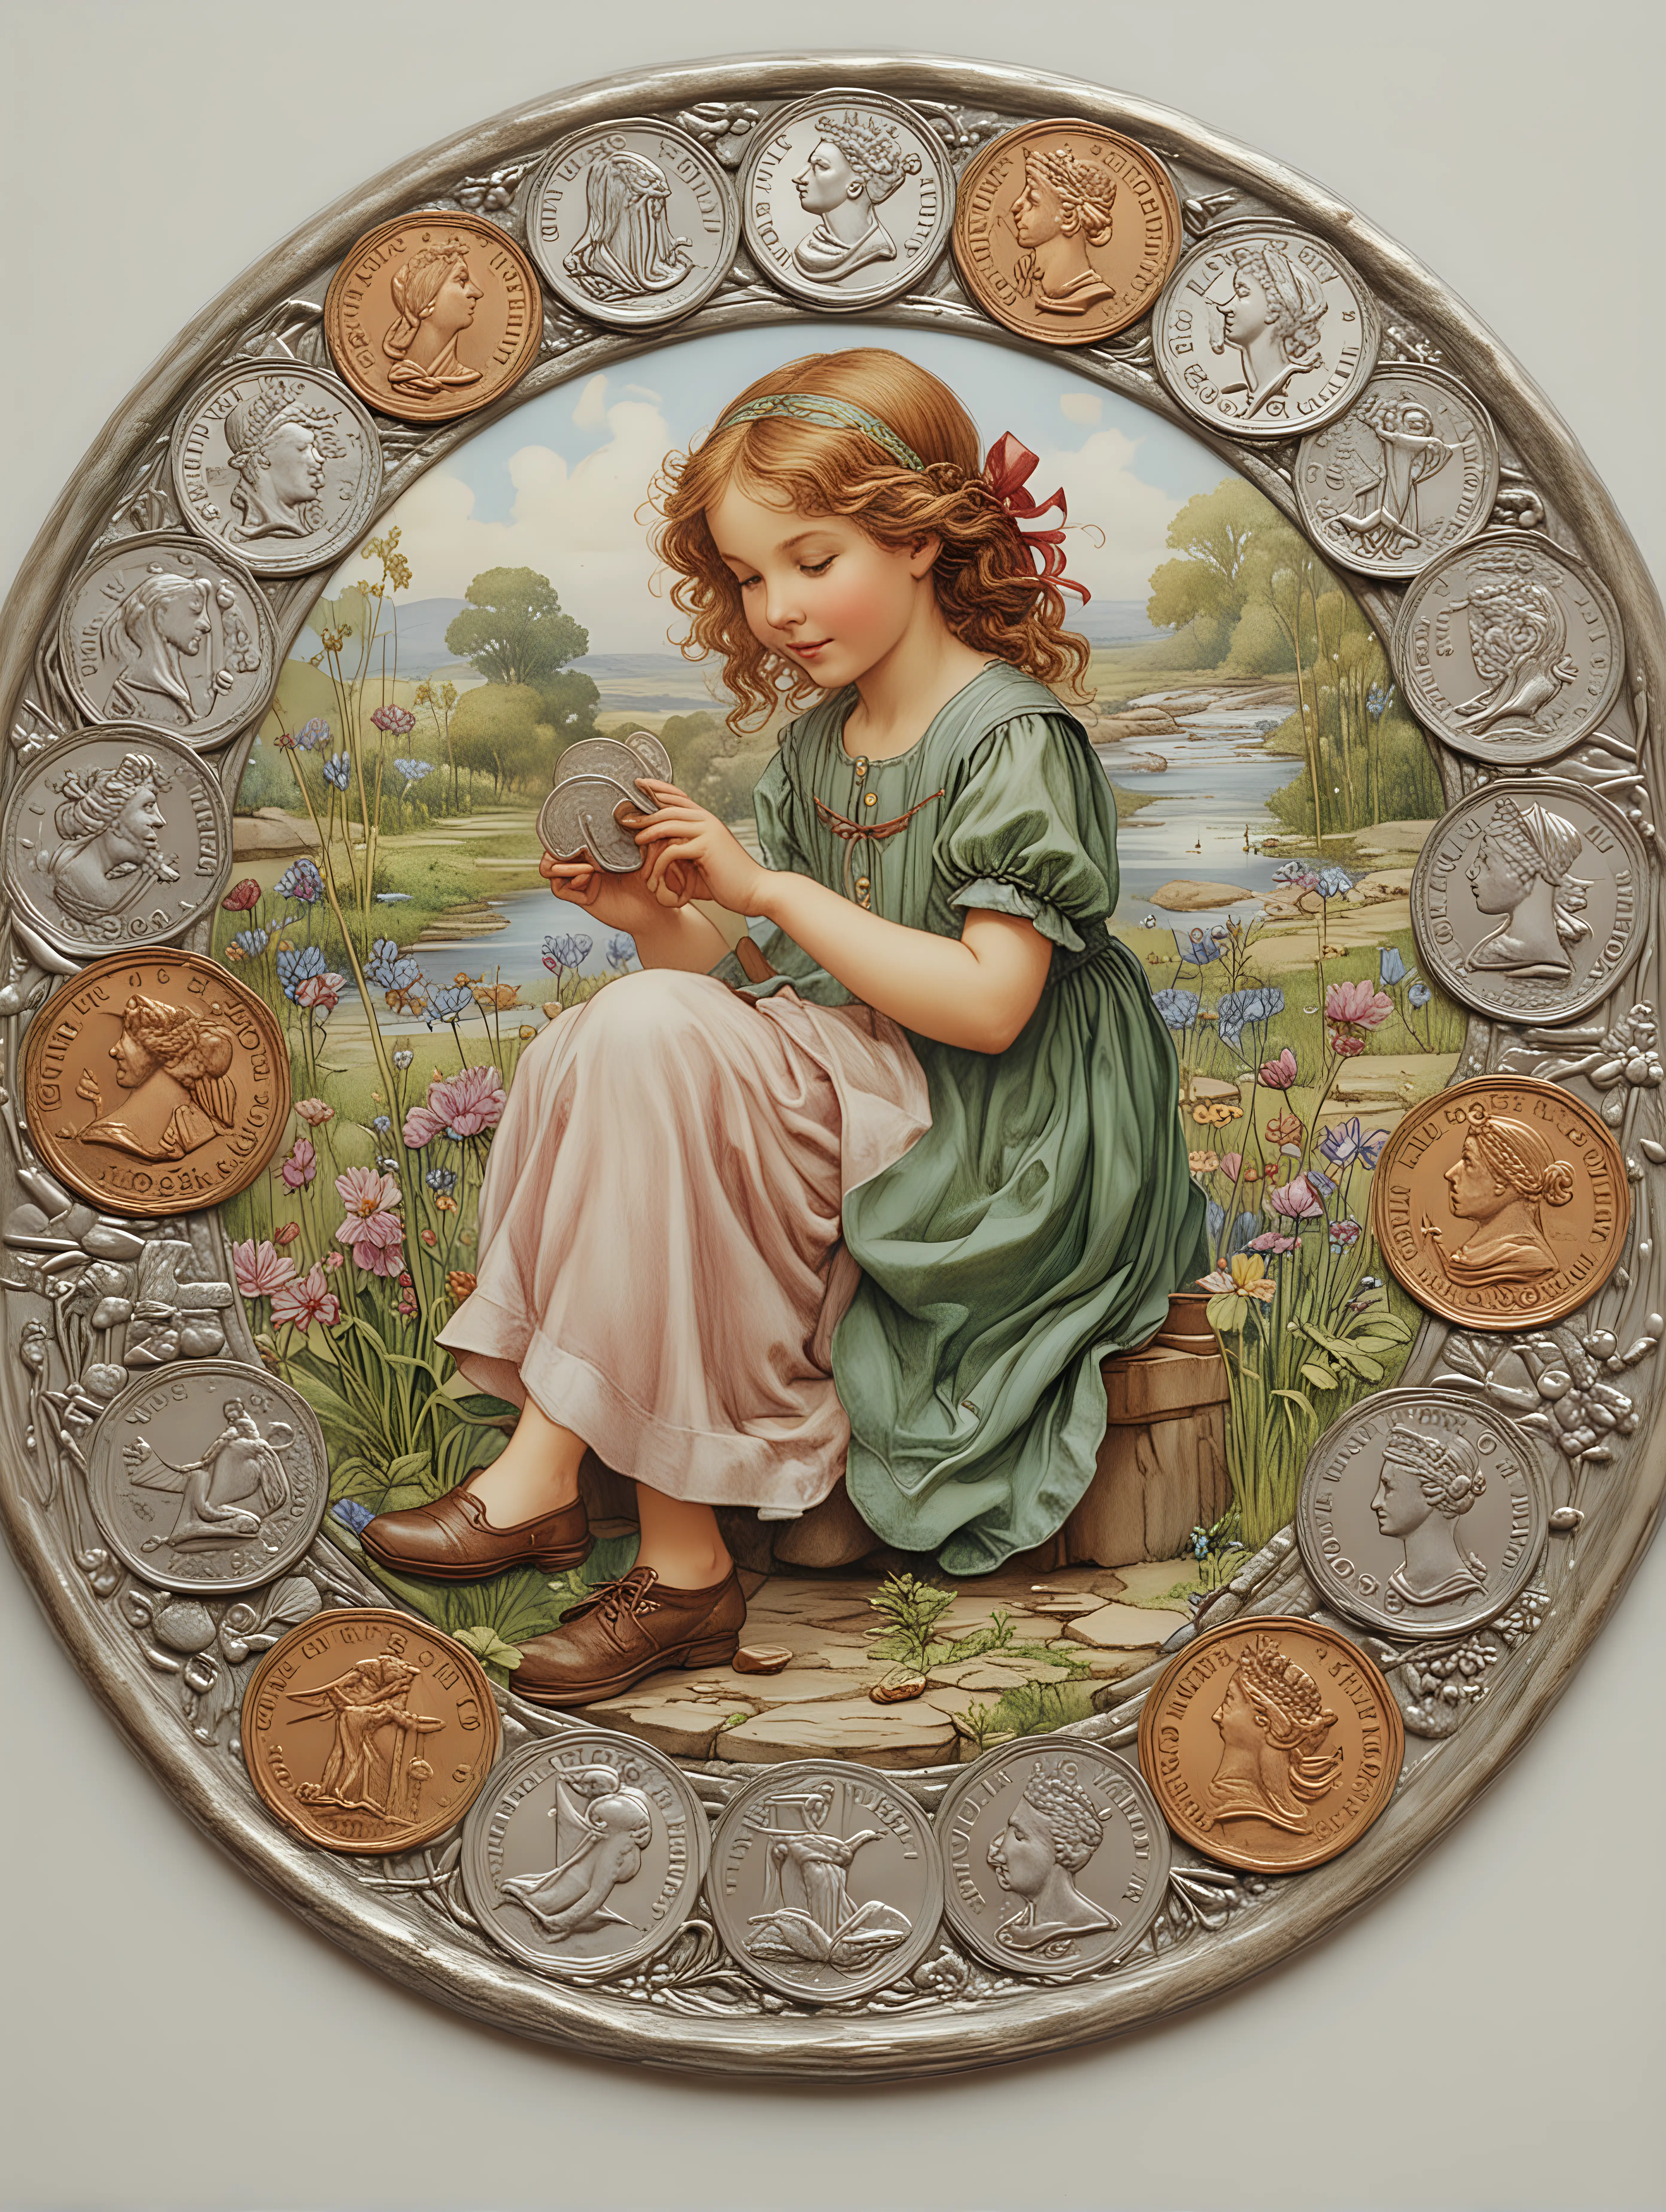 Enchanting Cicely Mary Barker Style Illustration Delightful Coin Collection